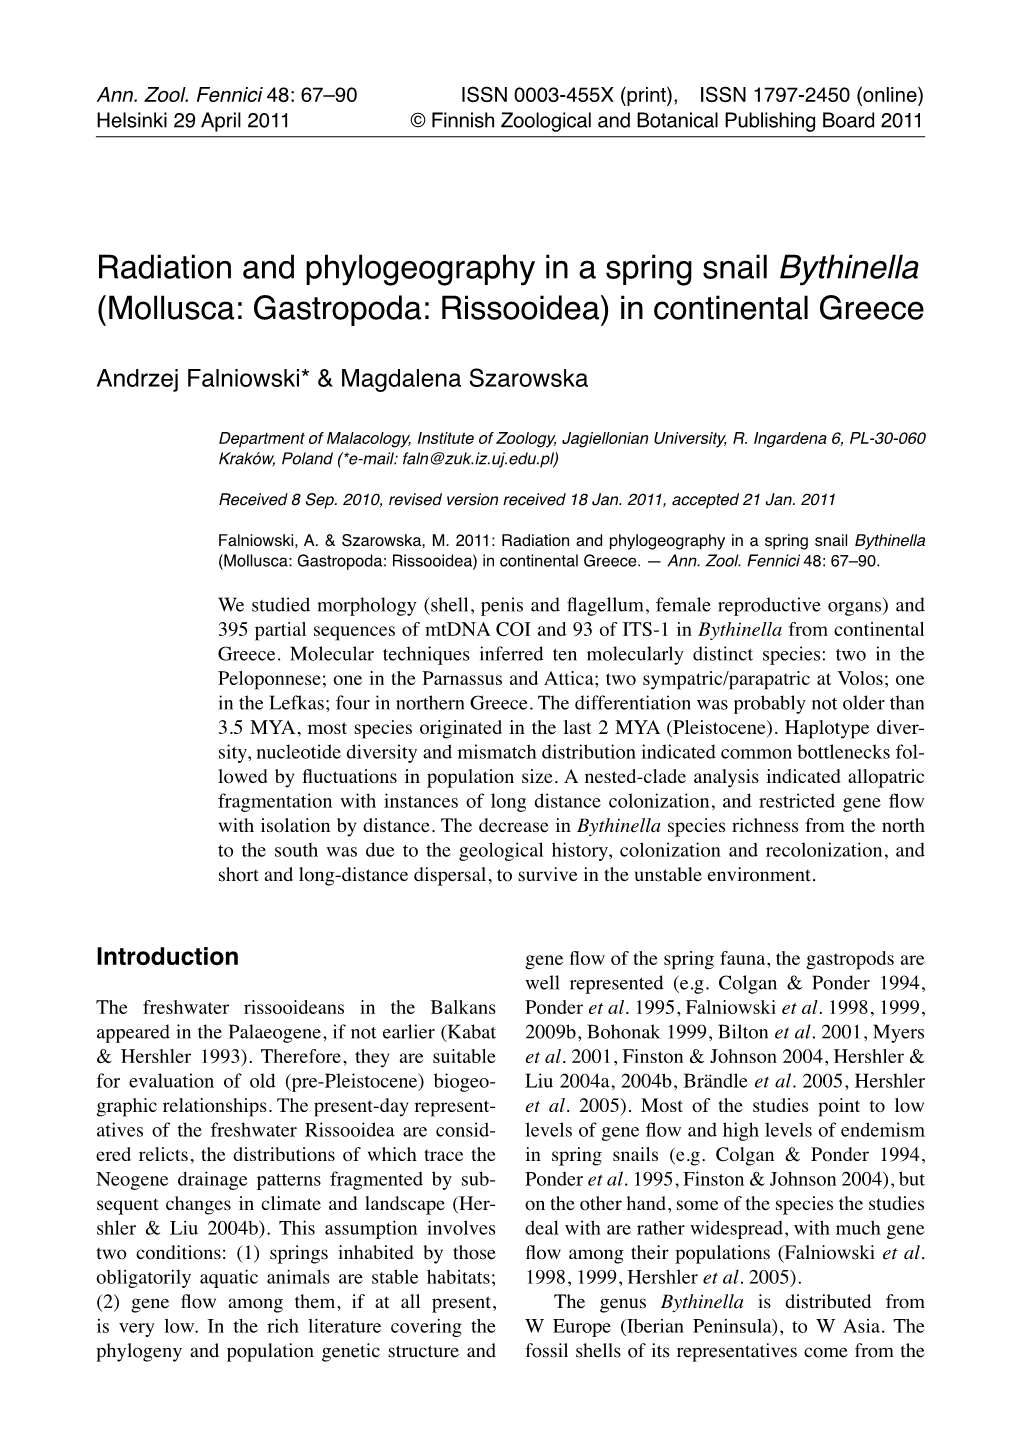 Radiation and Phylogeography in a Spring Snail Bythinella (Mollusca: Gastropoda: Rissooidea) in Continental Greece